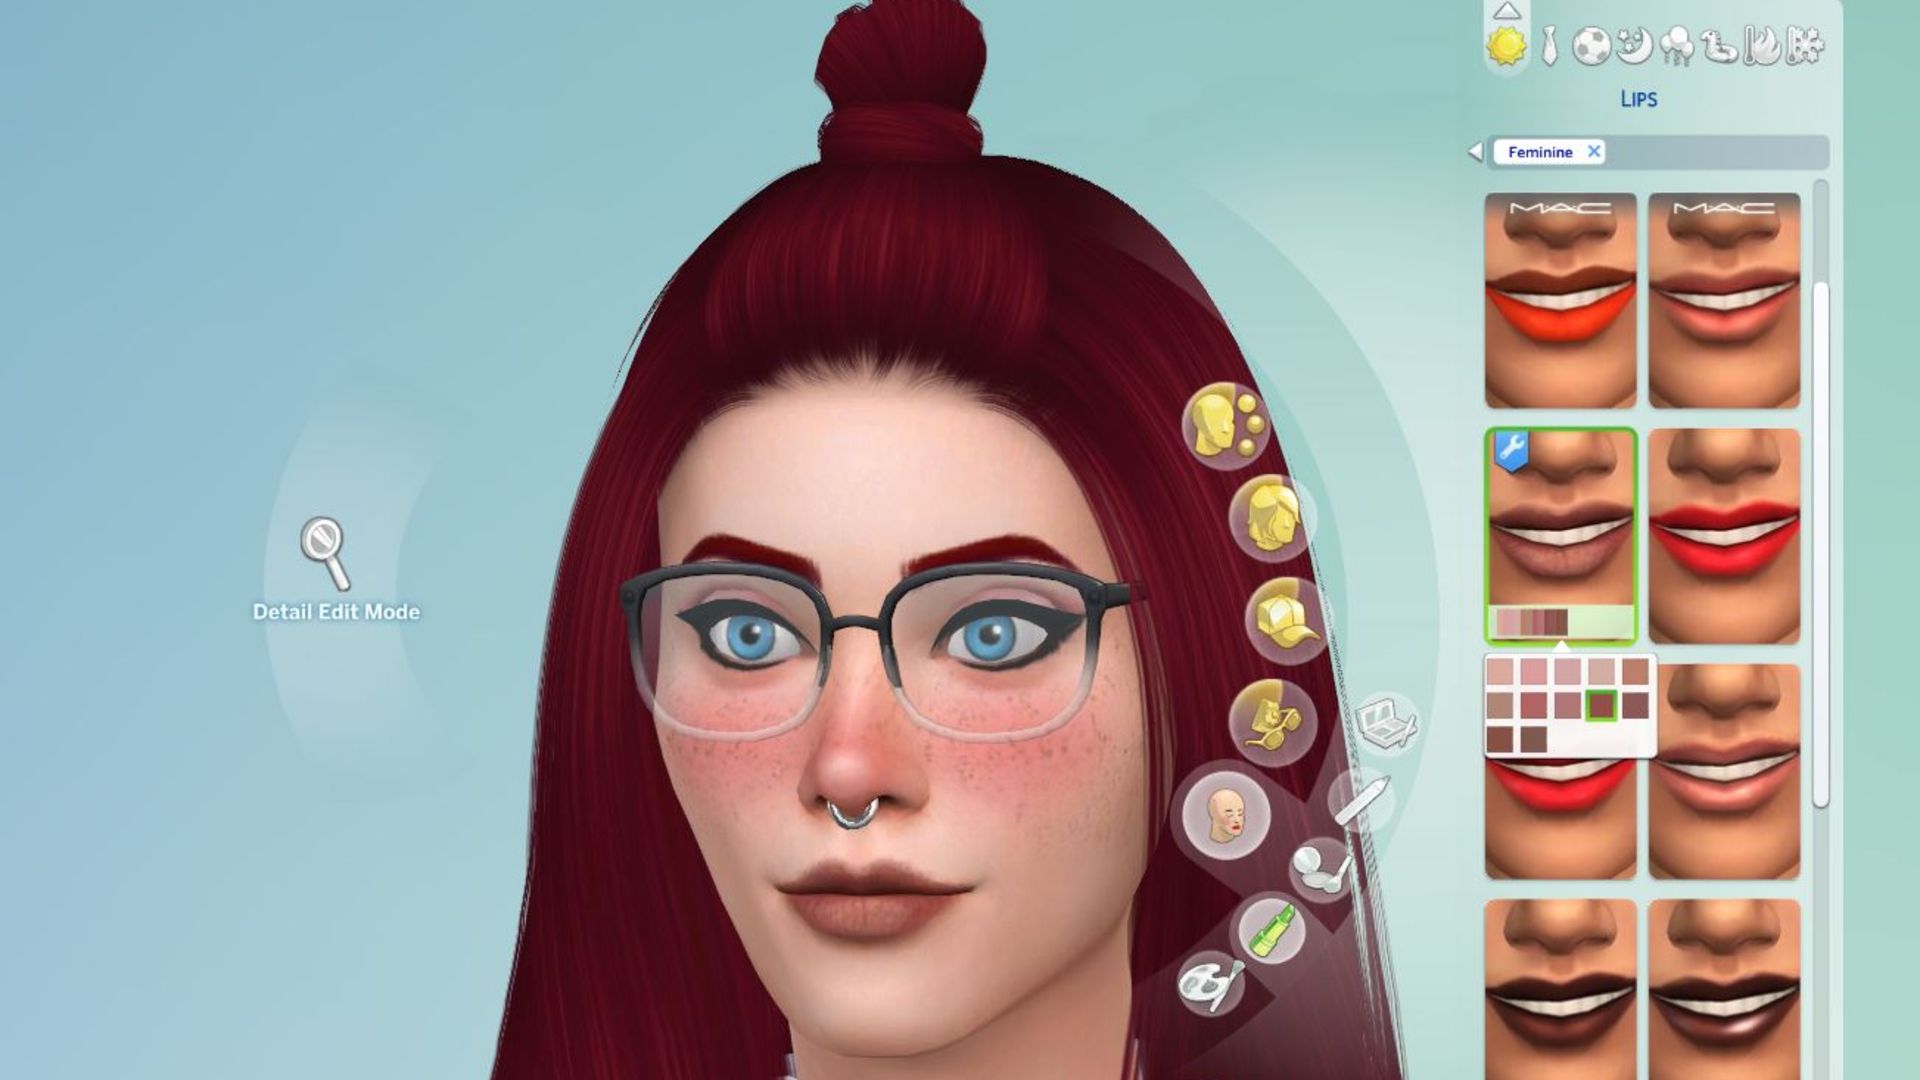 The Sims 4 Guide: Finding And Installing Custom Content